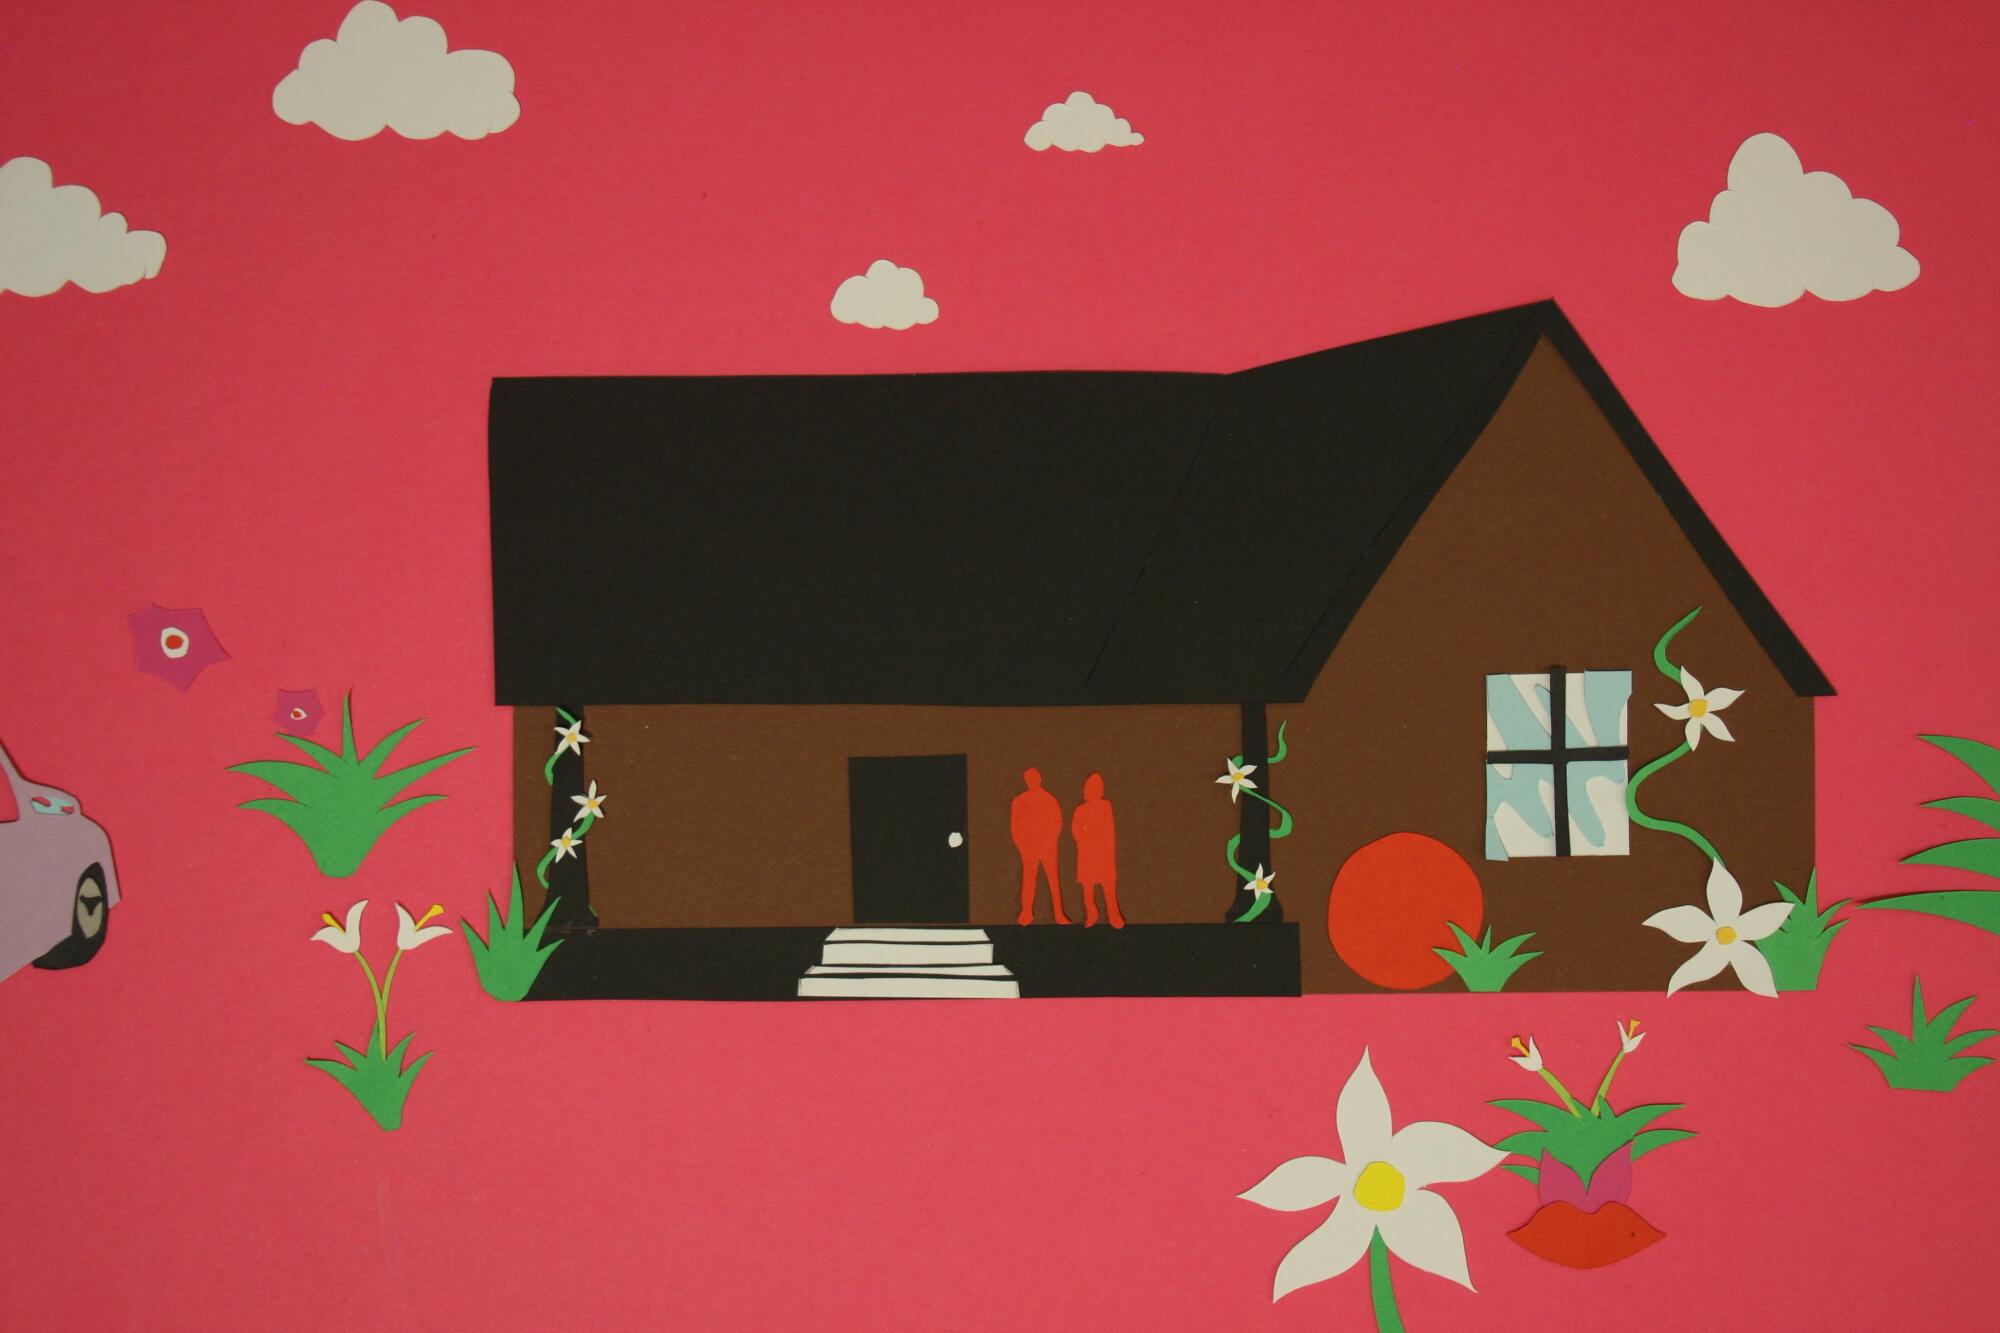 Illustration of a brown house with a black roof with silhouettes of people in red on the porch and plants around it all.